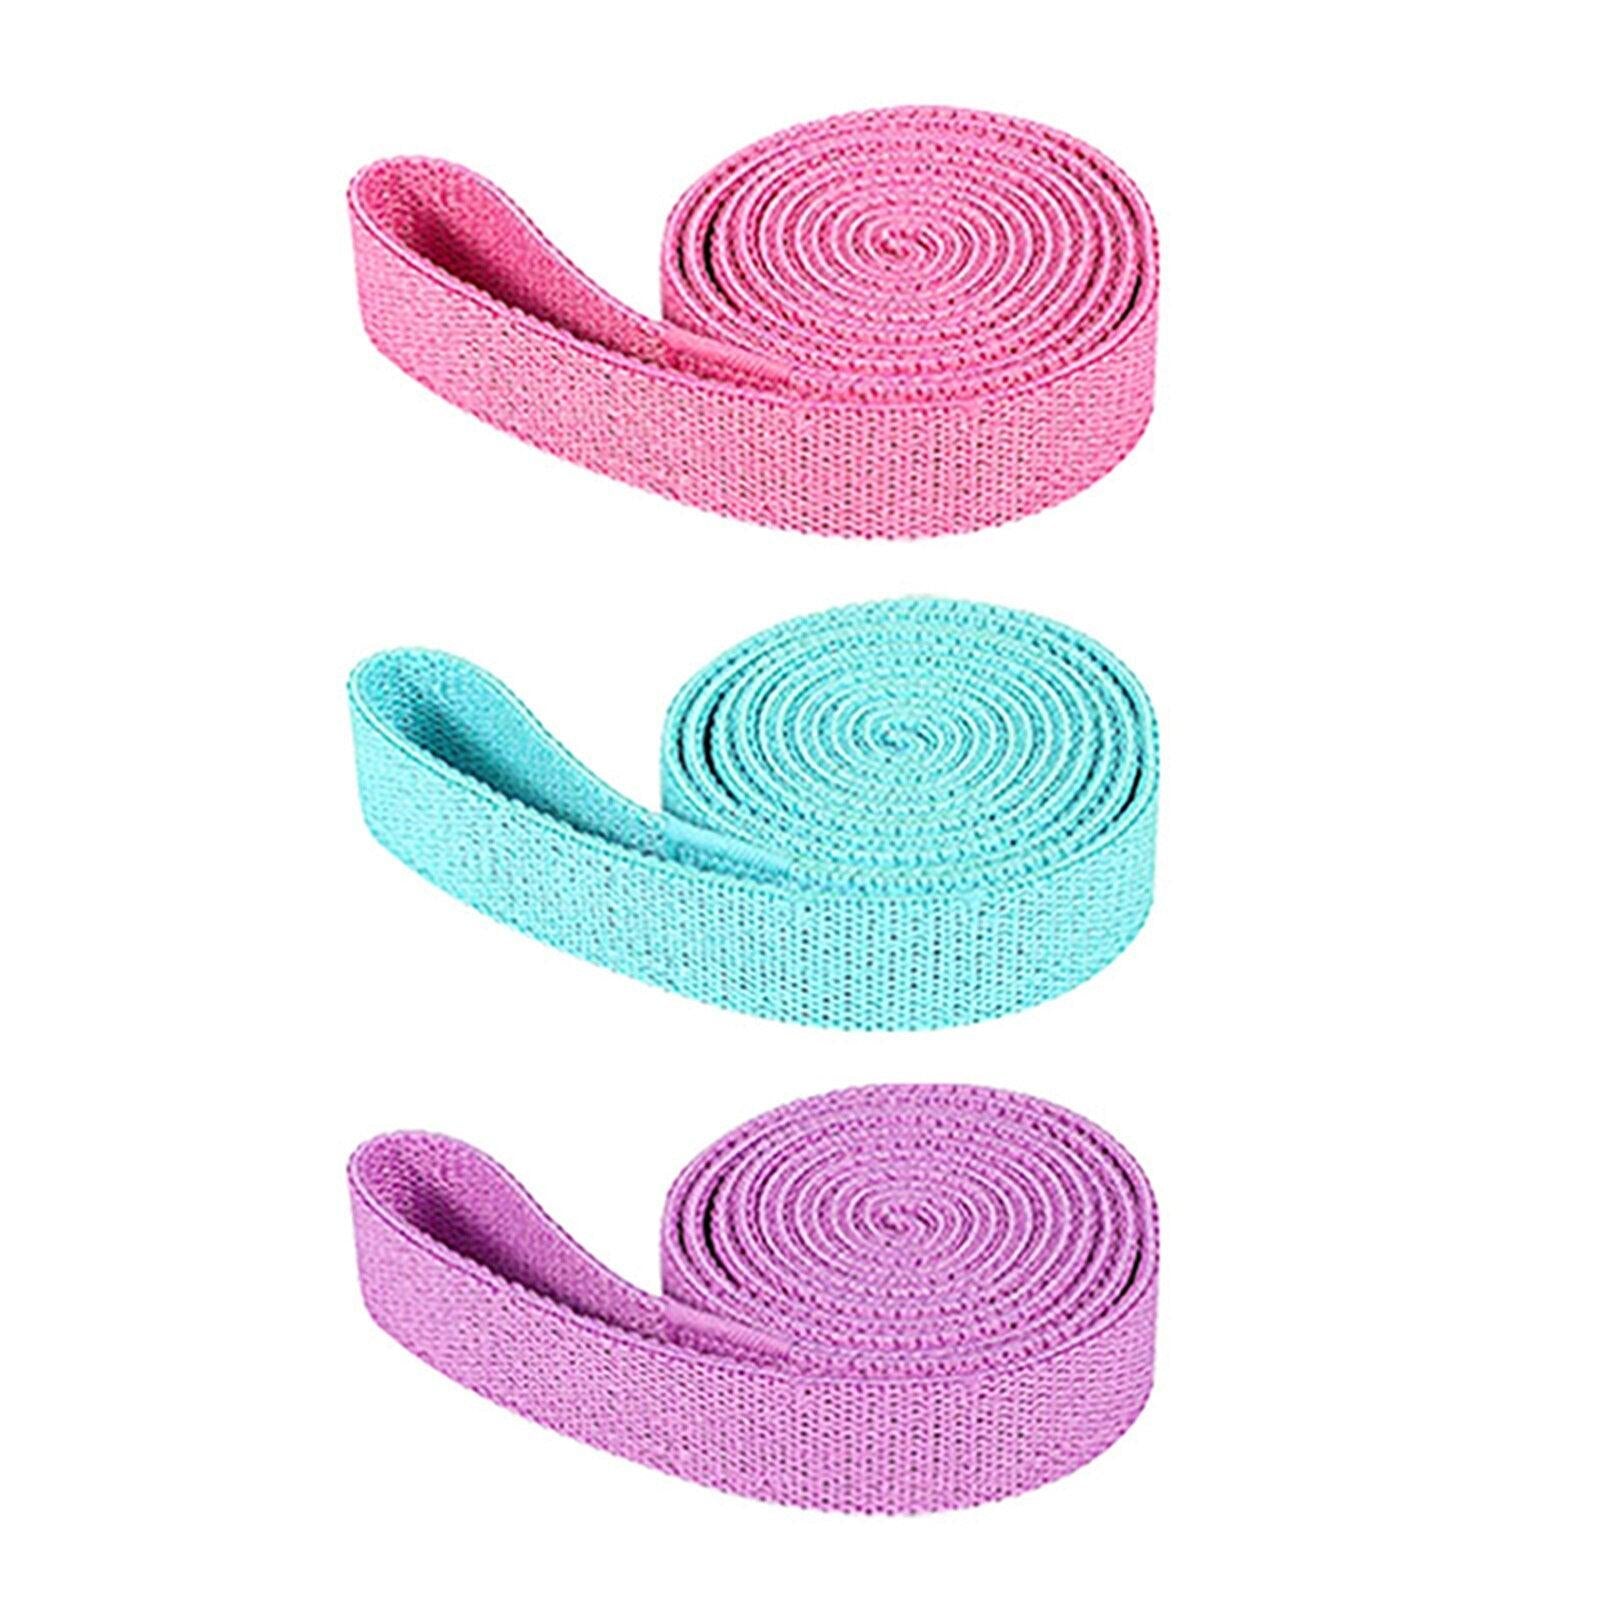 Polyester Cotton Dance Stretch Body Yoga Rally Band Pilates Equipment 3pcs - Etyn Online {{ product_tag }}